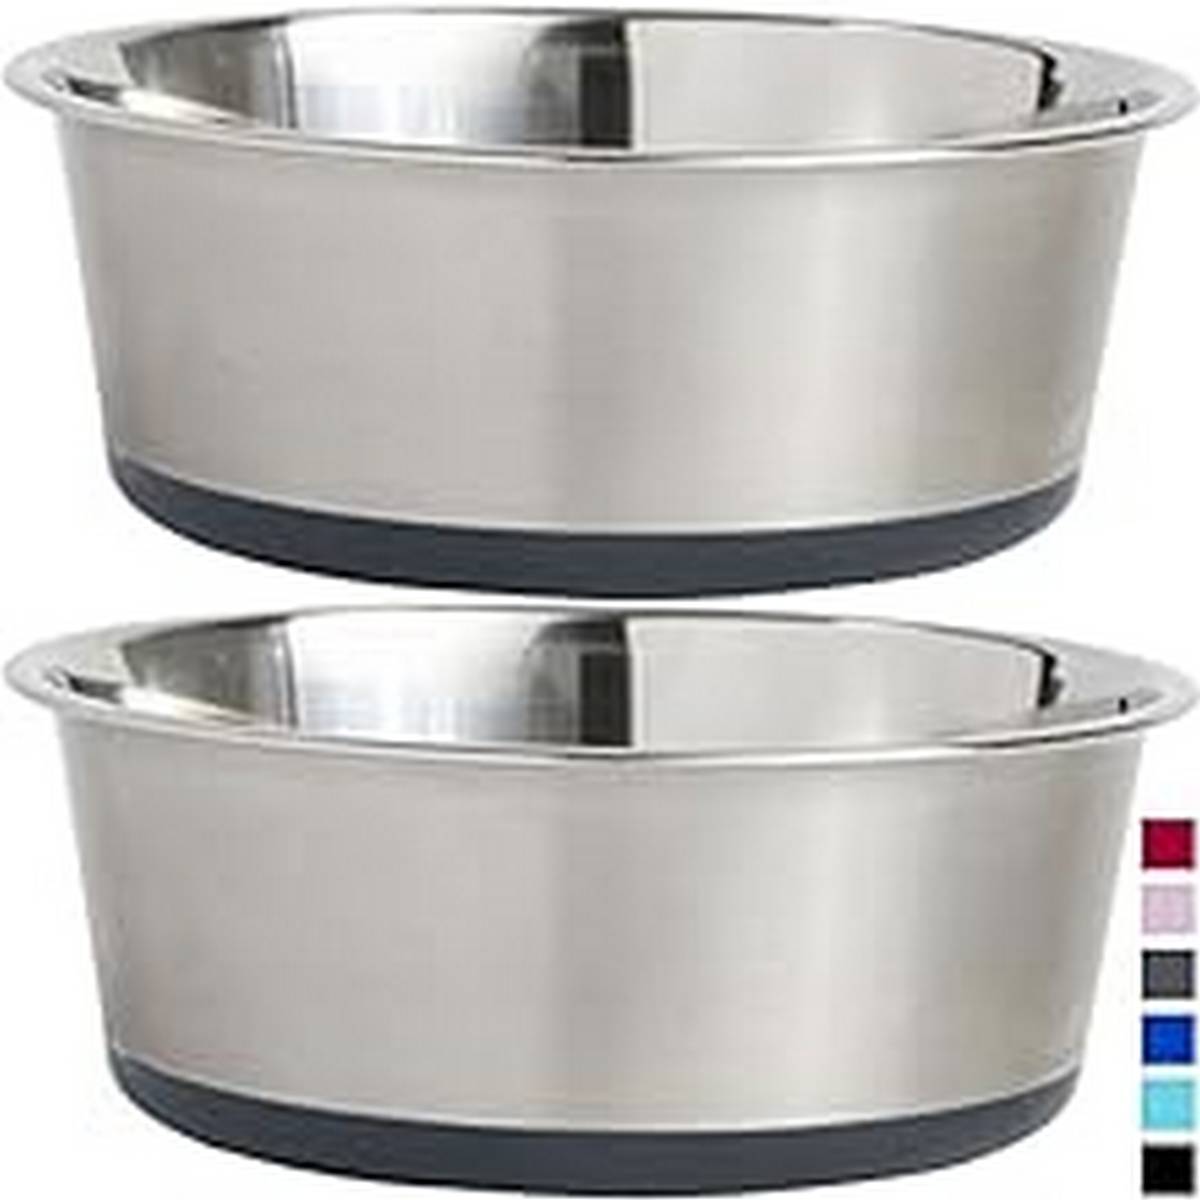 Supplies_Gorilla Grip Stainless Steel Metal Pet Bowls Set of Quiet Rubber Base Heavy Duty Rust Resistant Food Grade BPA Free Less Sliding for Cats and Dogs Dry and Wet Foods Cups Gray